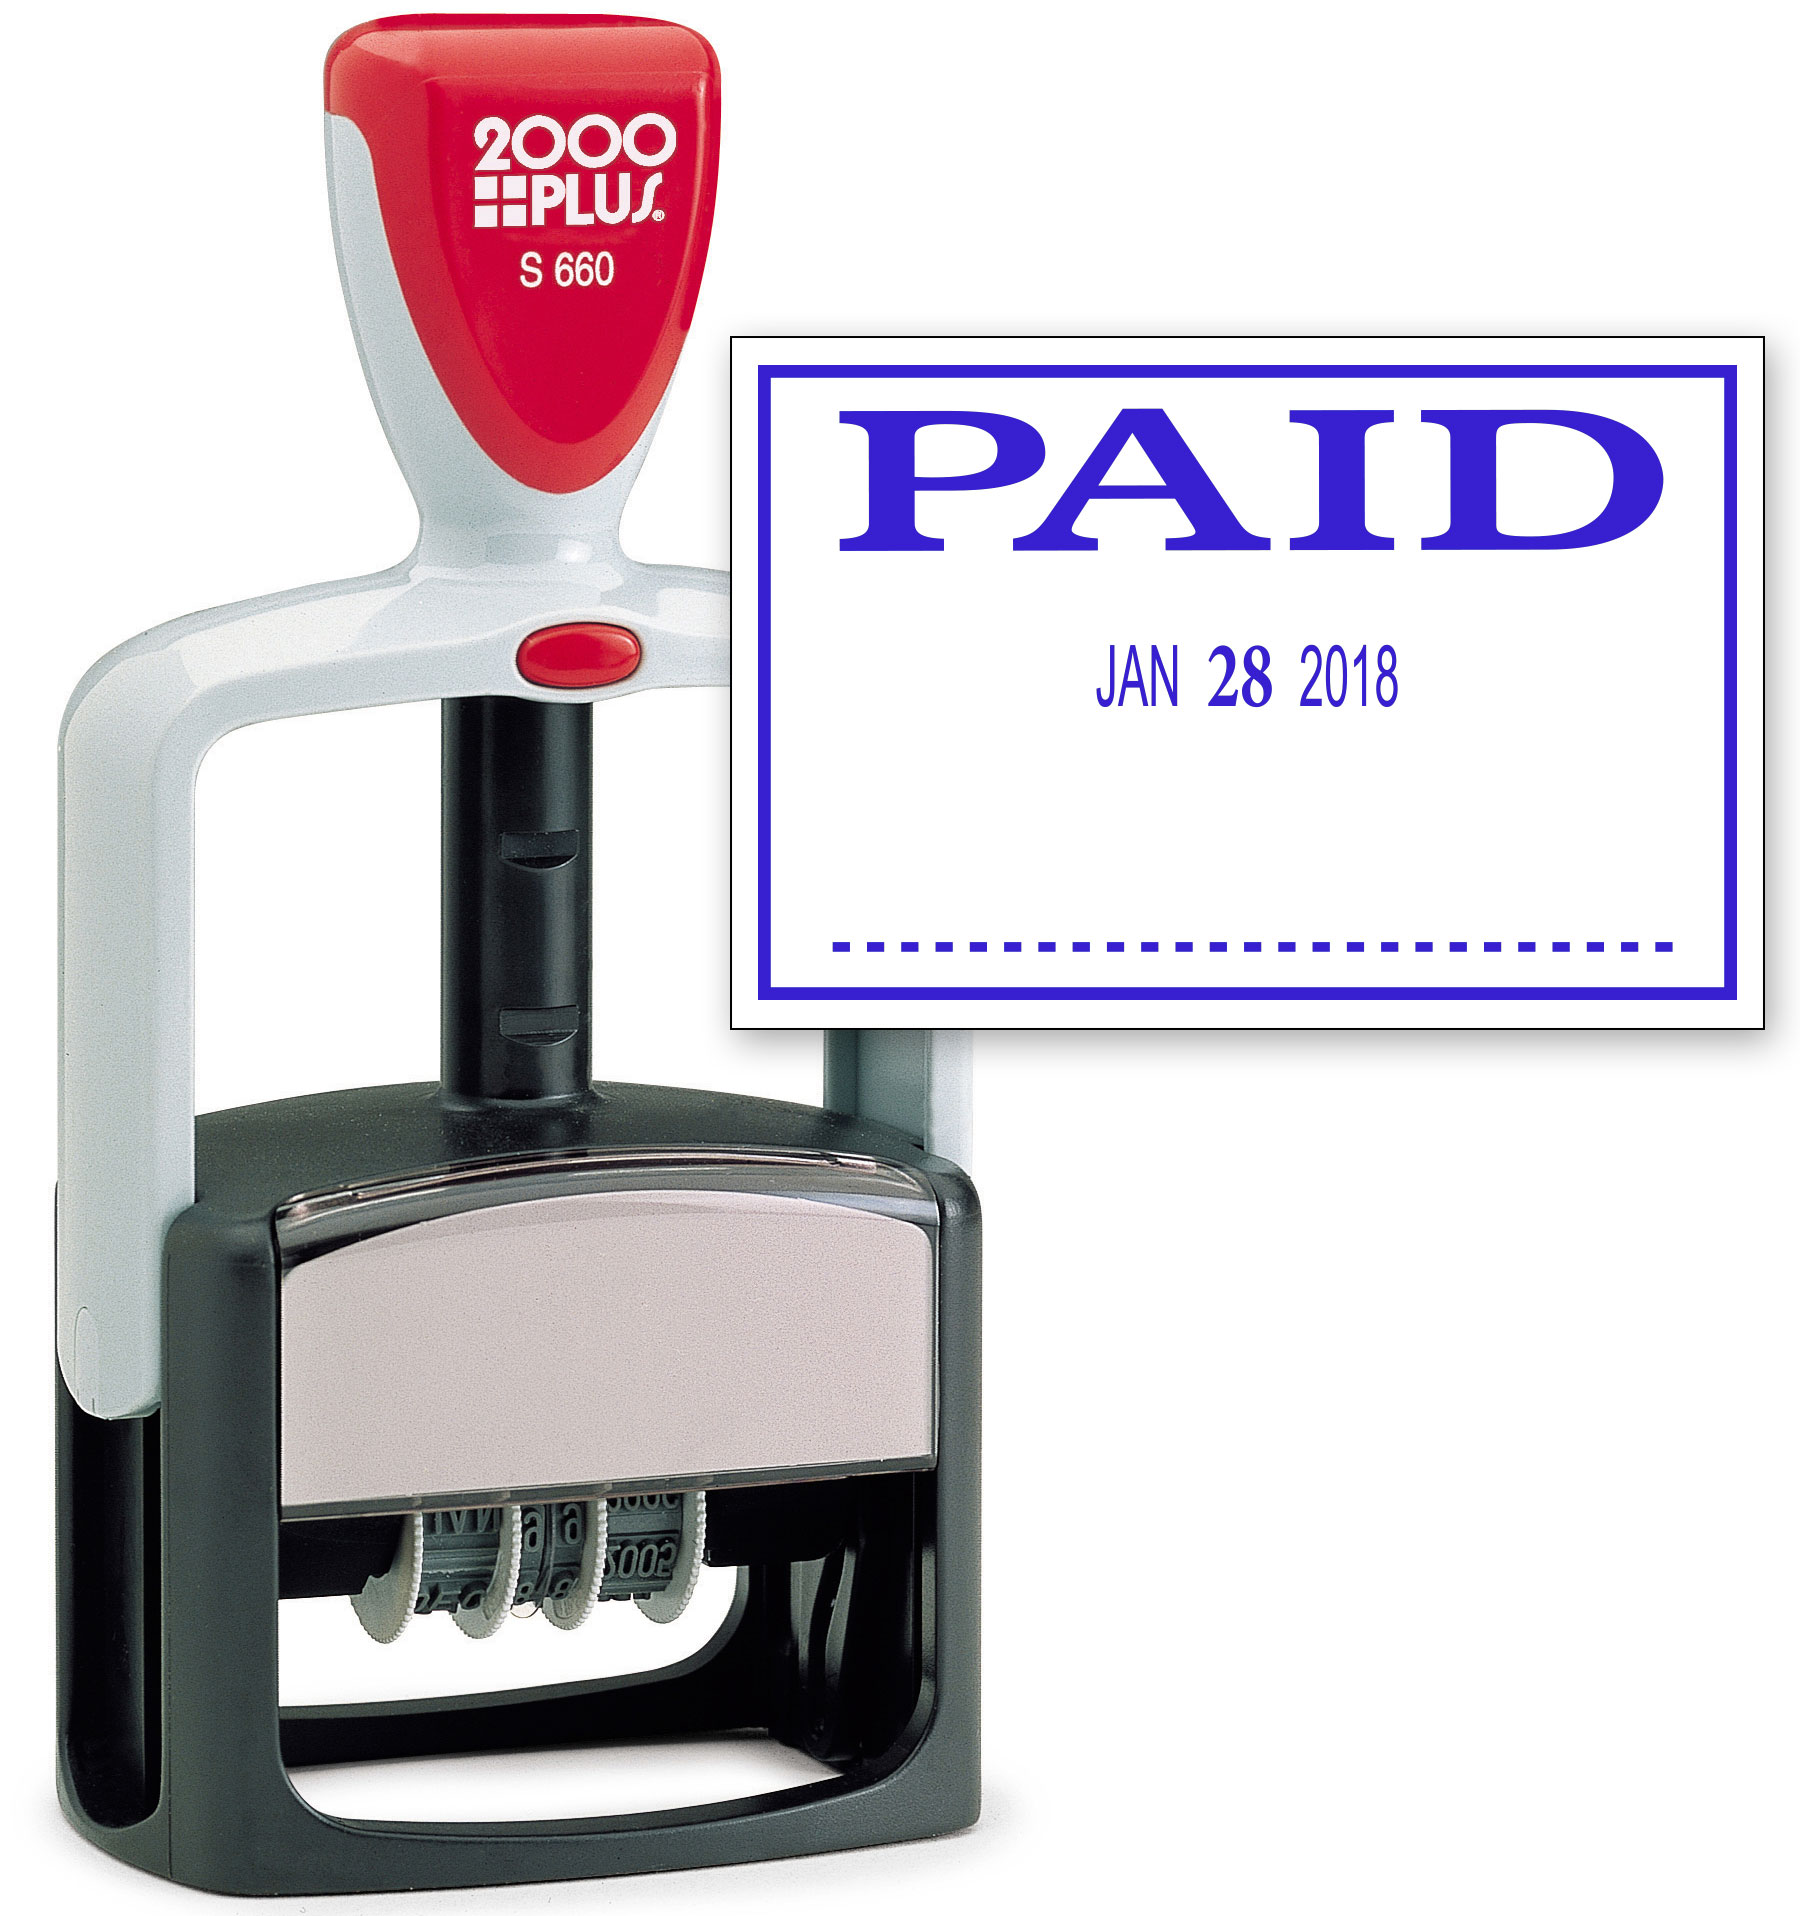 2000 PLUS Heavy Duty Style 2-Color Date Stamp with PAID self inking stamp - Blue Ink